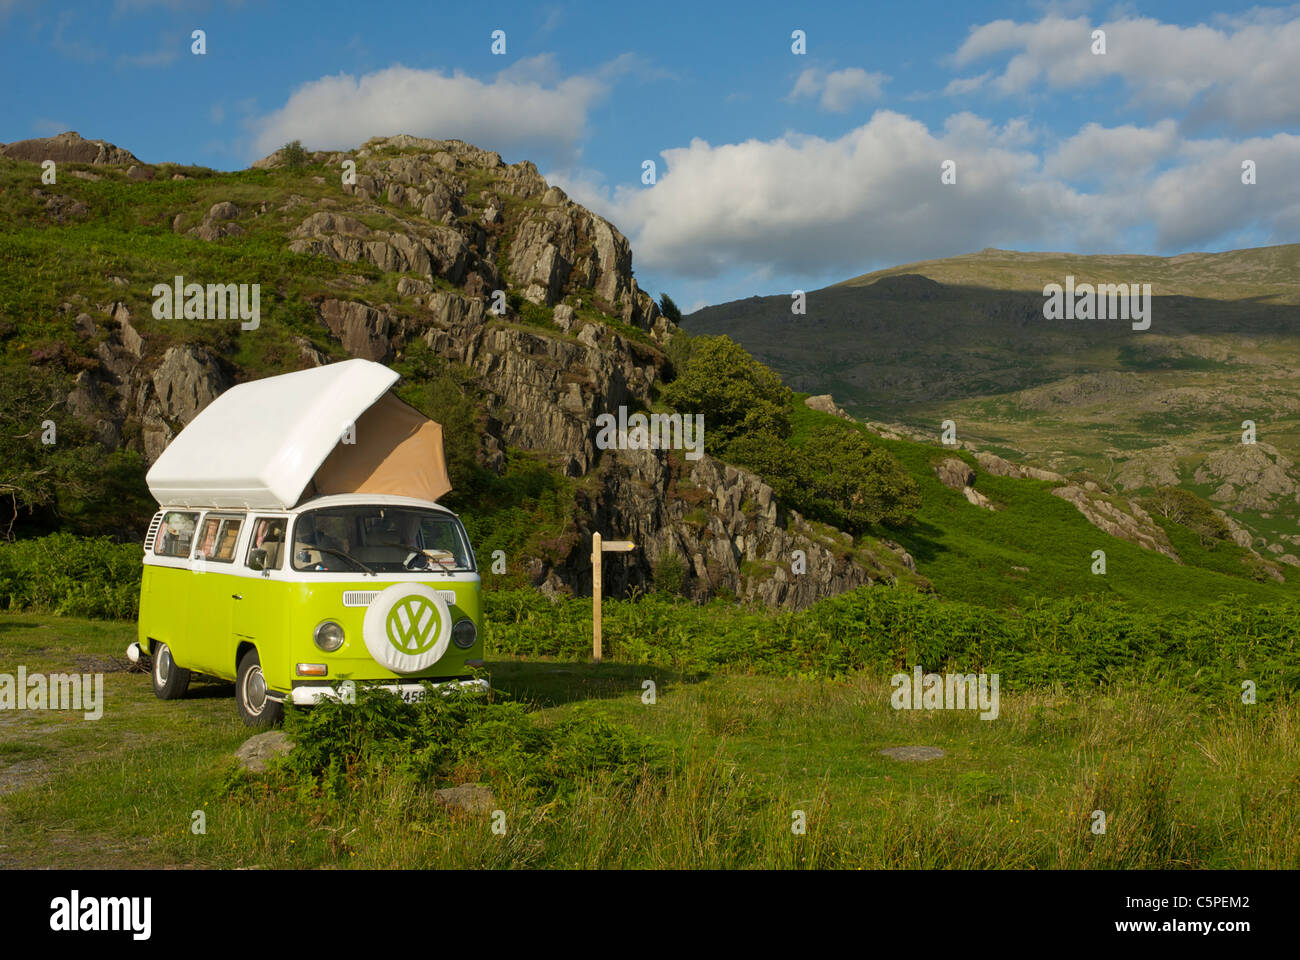 VW camper van parked in rocky landscape in the Duddon Valley, Lake District National Park, Cumbria, England UK Stock Photo